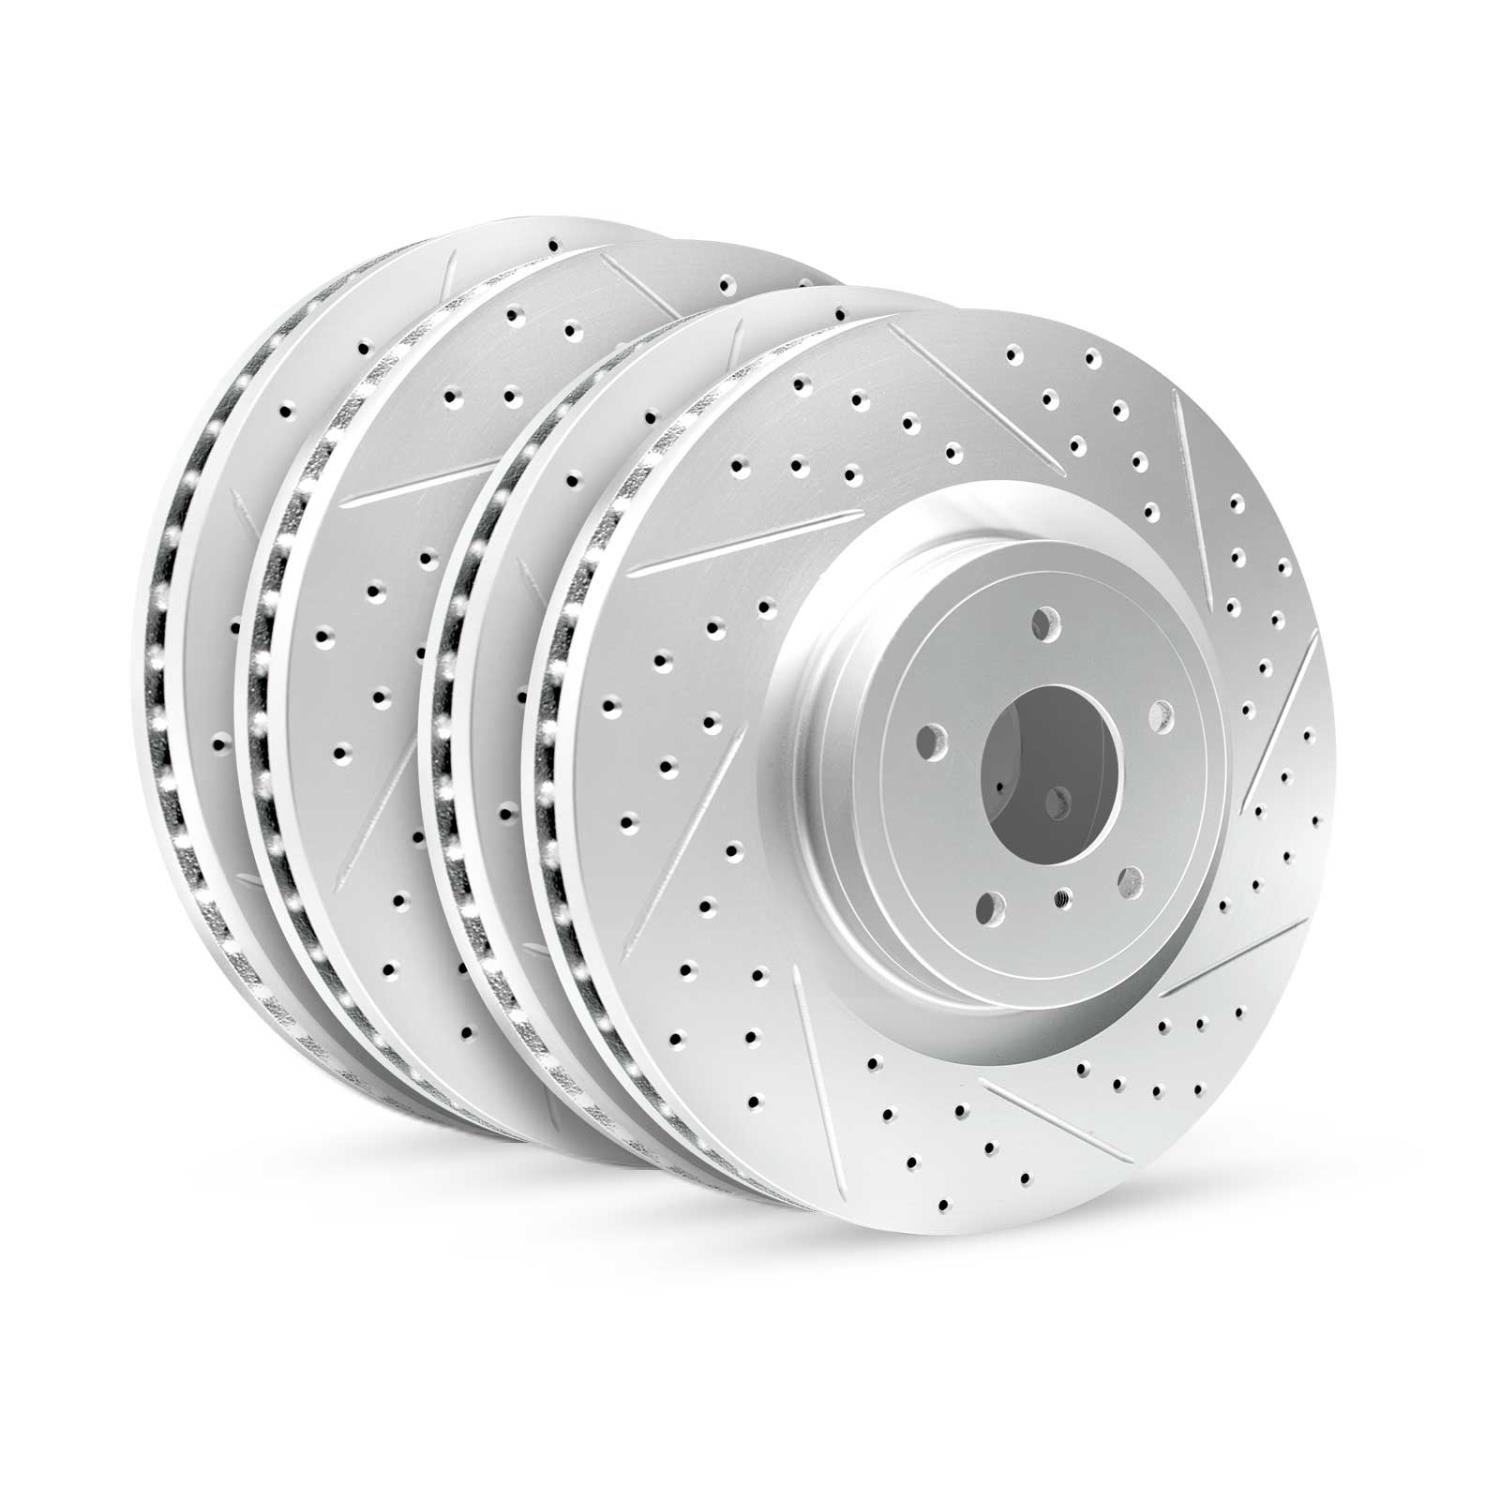 GEO-Carbon Drilled/Slotted Rotors, 2013-2020 Lexus/Toyota/Scion, Position: Front/Rear